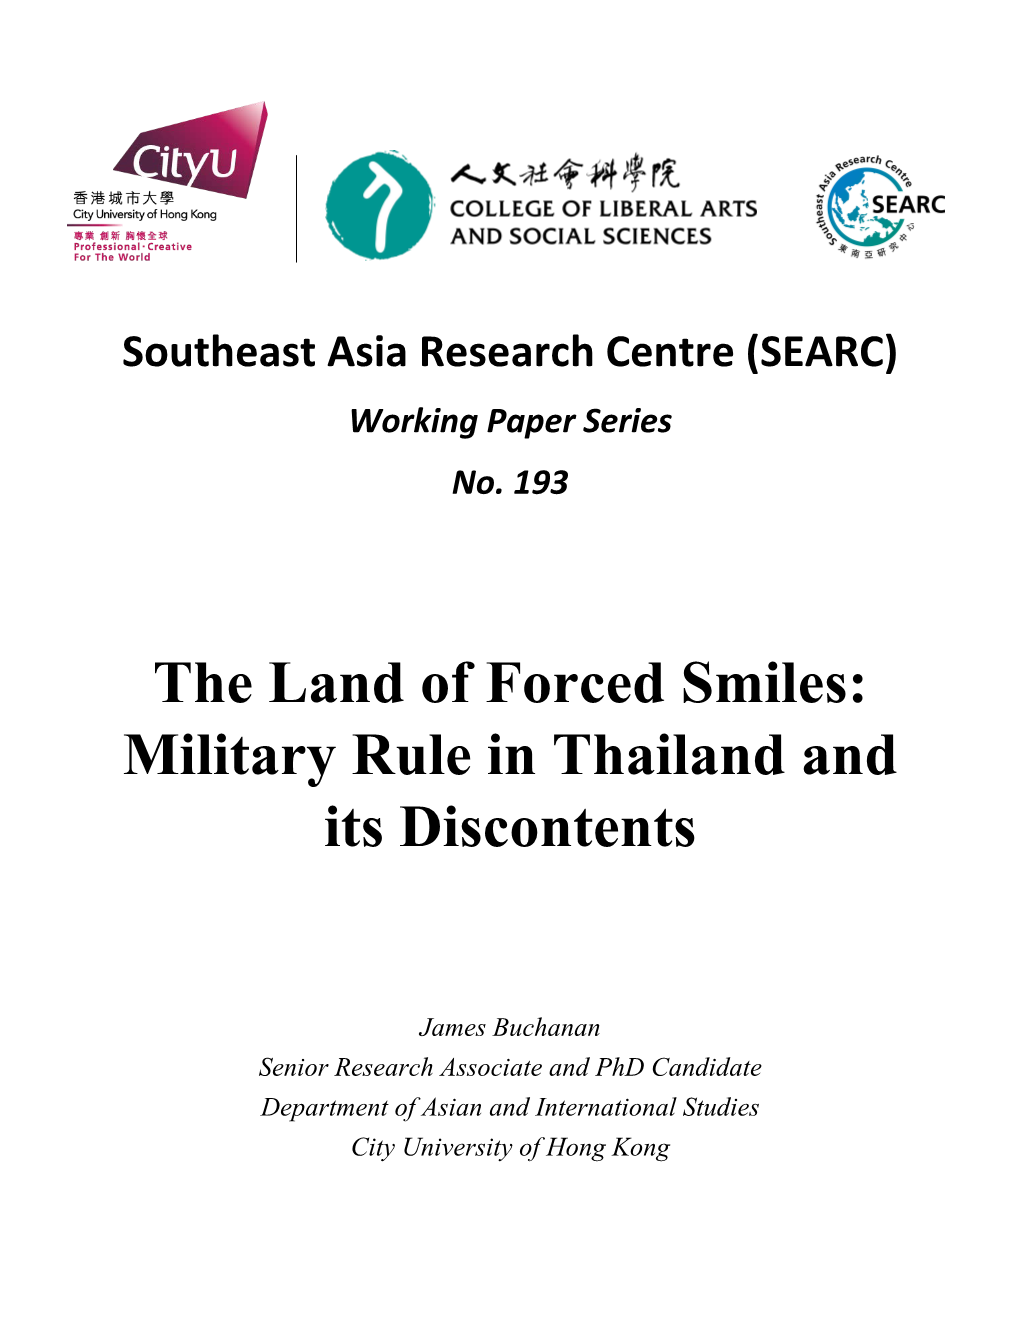 The Land of Forced Smiles: Military Rule in Thailand and Its Discontents